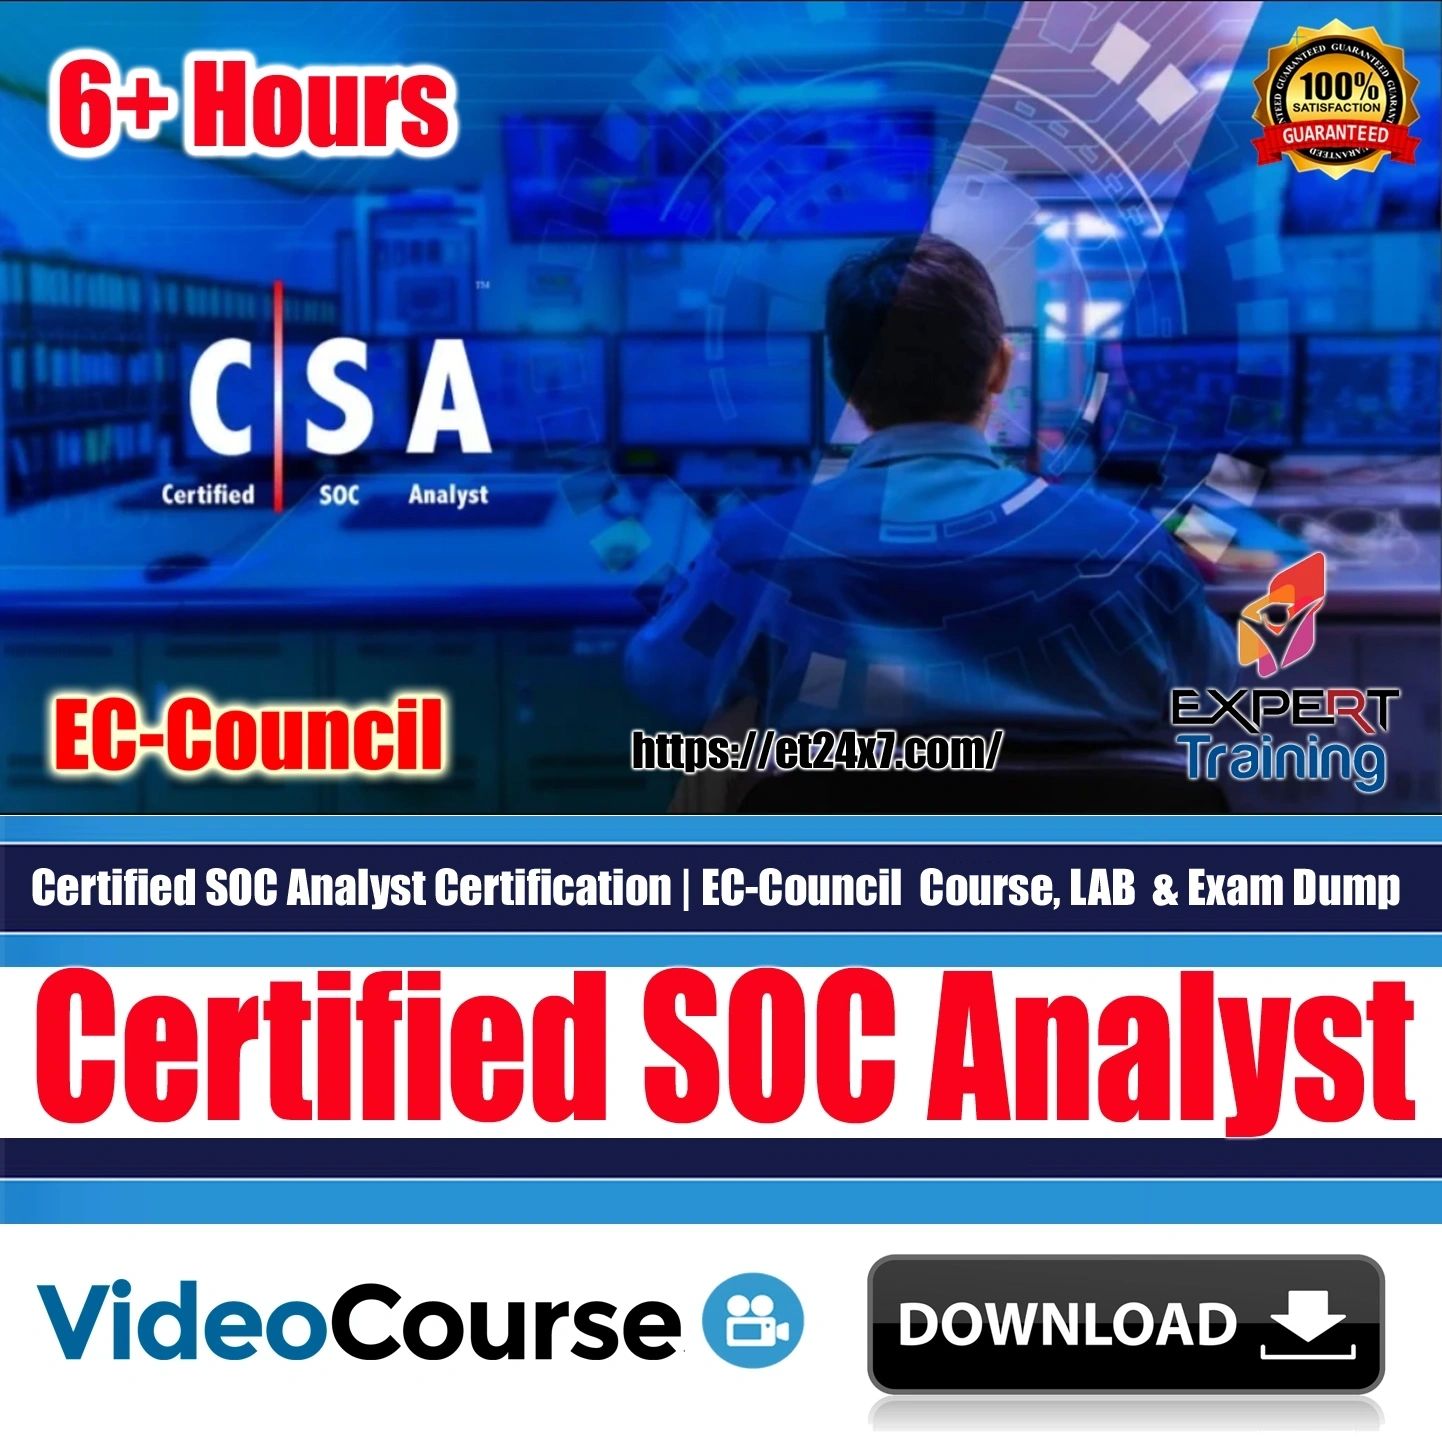 Certified SOC Analyst Certification EC-Council Course, LAB & Exam Dump